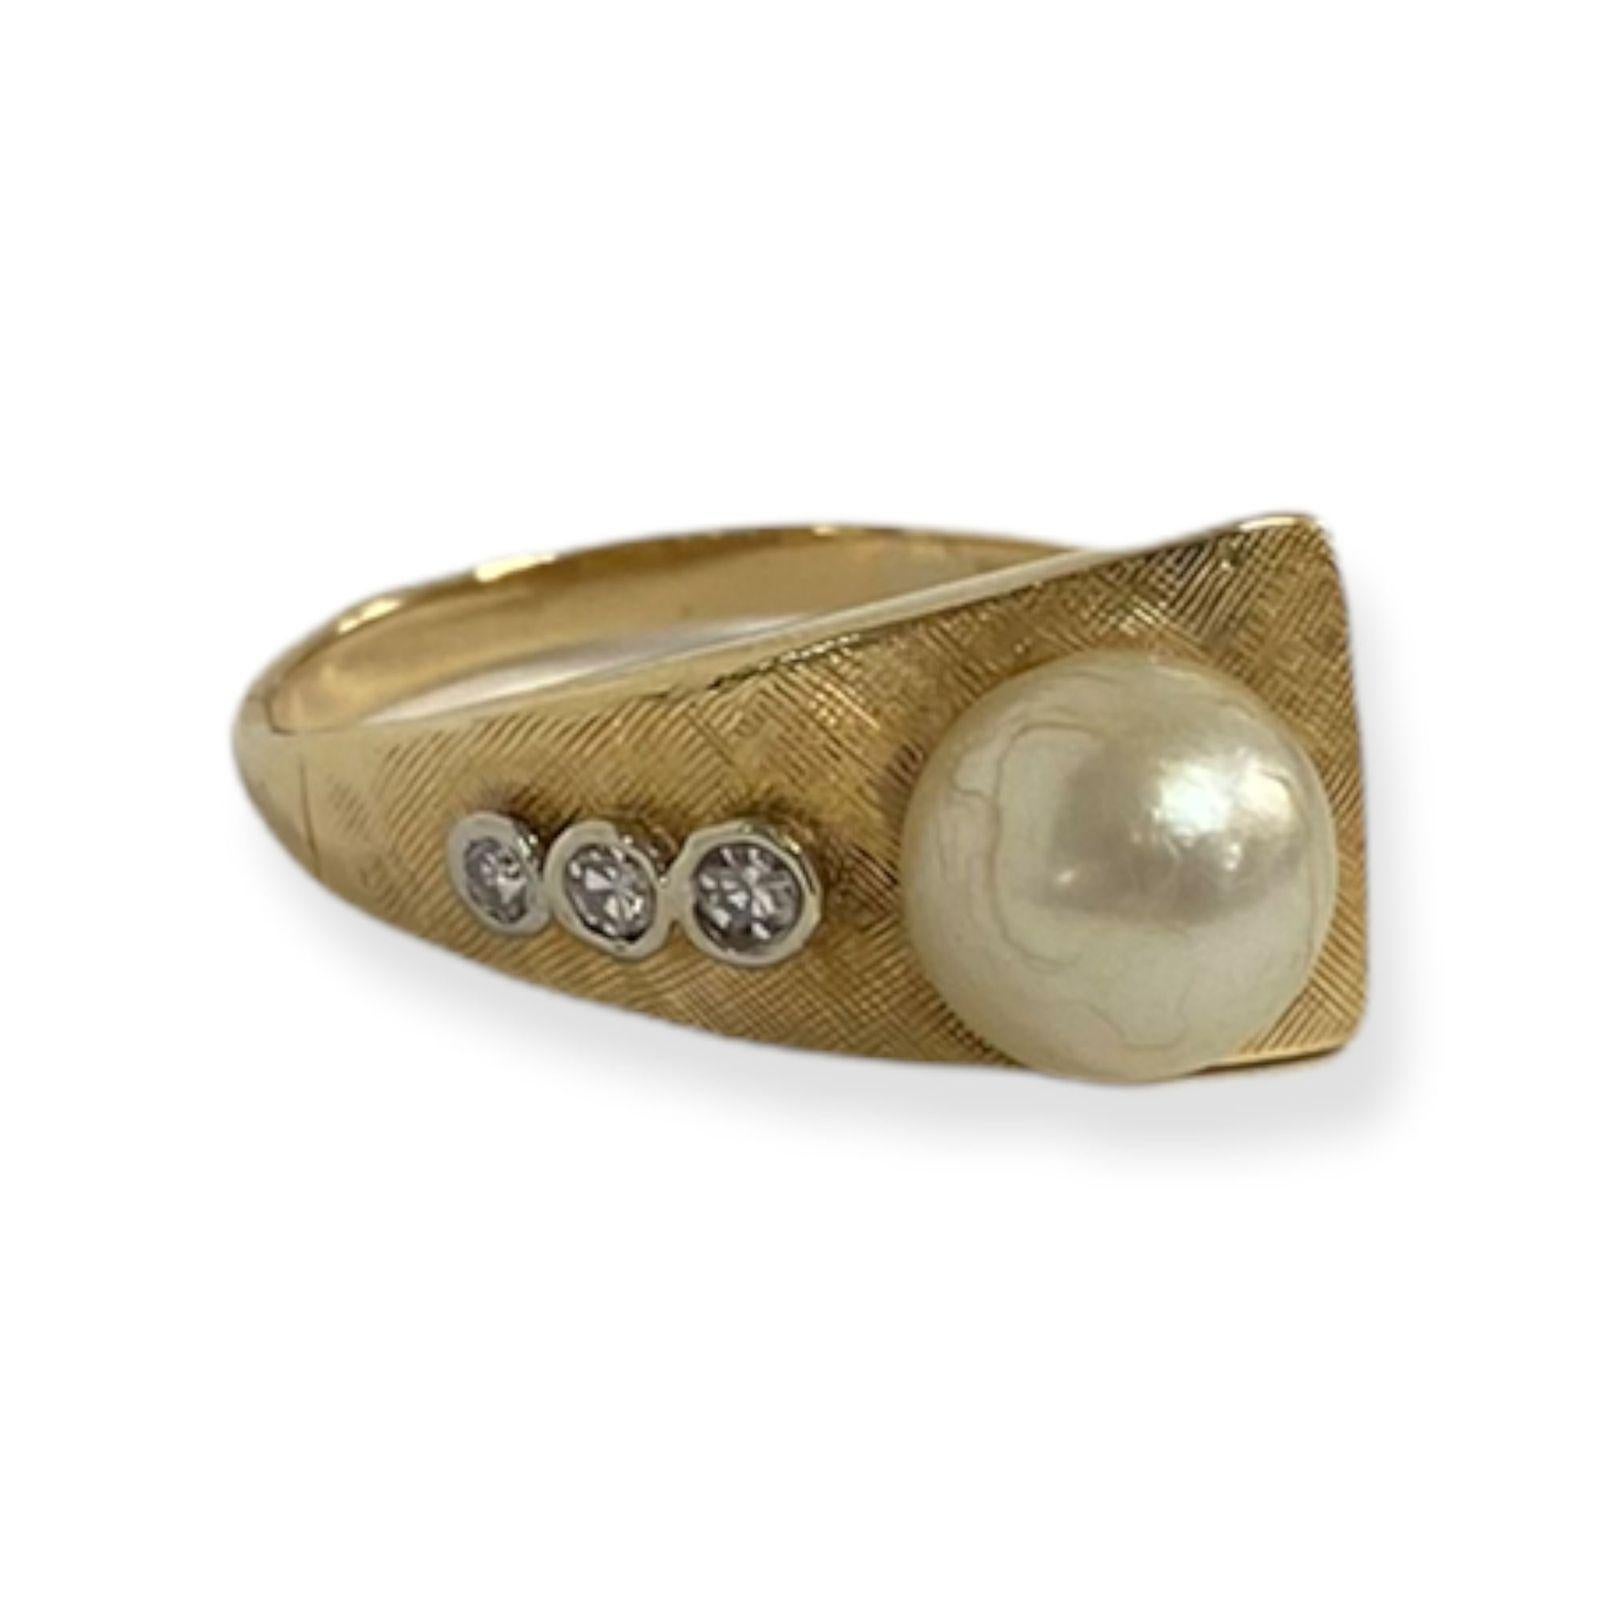 This abstract ring from the Suzy Levian Vintage-Inspired One-of-a-Kind collection features 3 white diamonds (.10cttw) bezel set across a band, accenting a center 7mm white pearl in a 14k yellow gold setting. So intricate in detail and depth, this